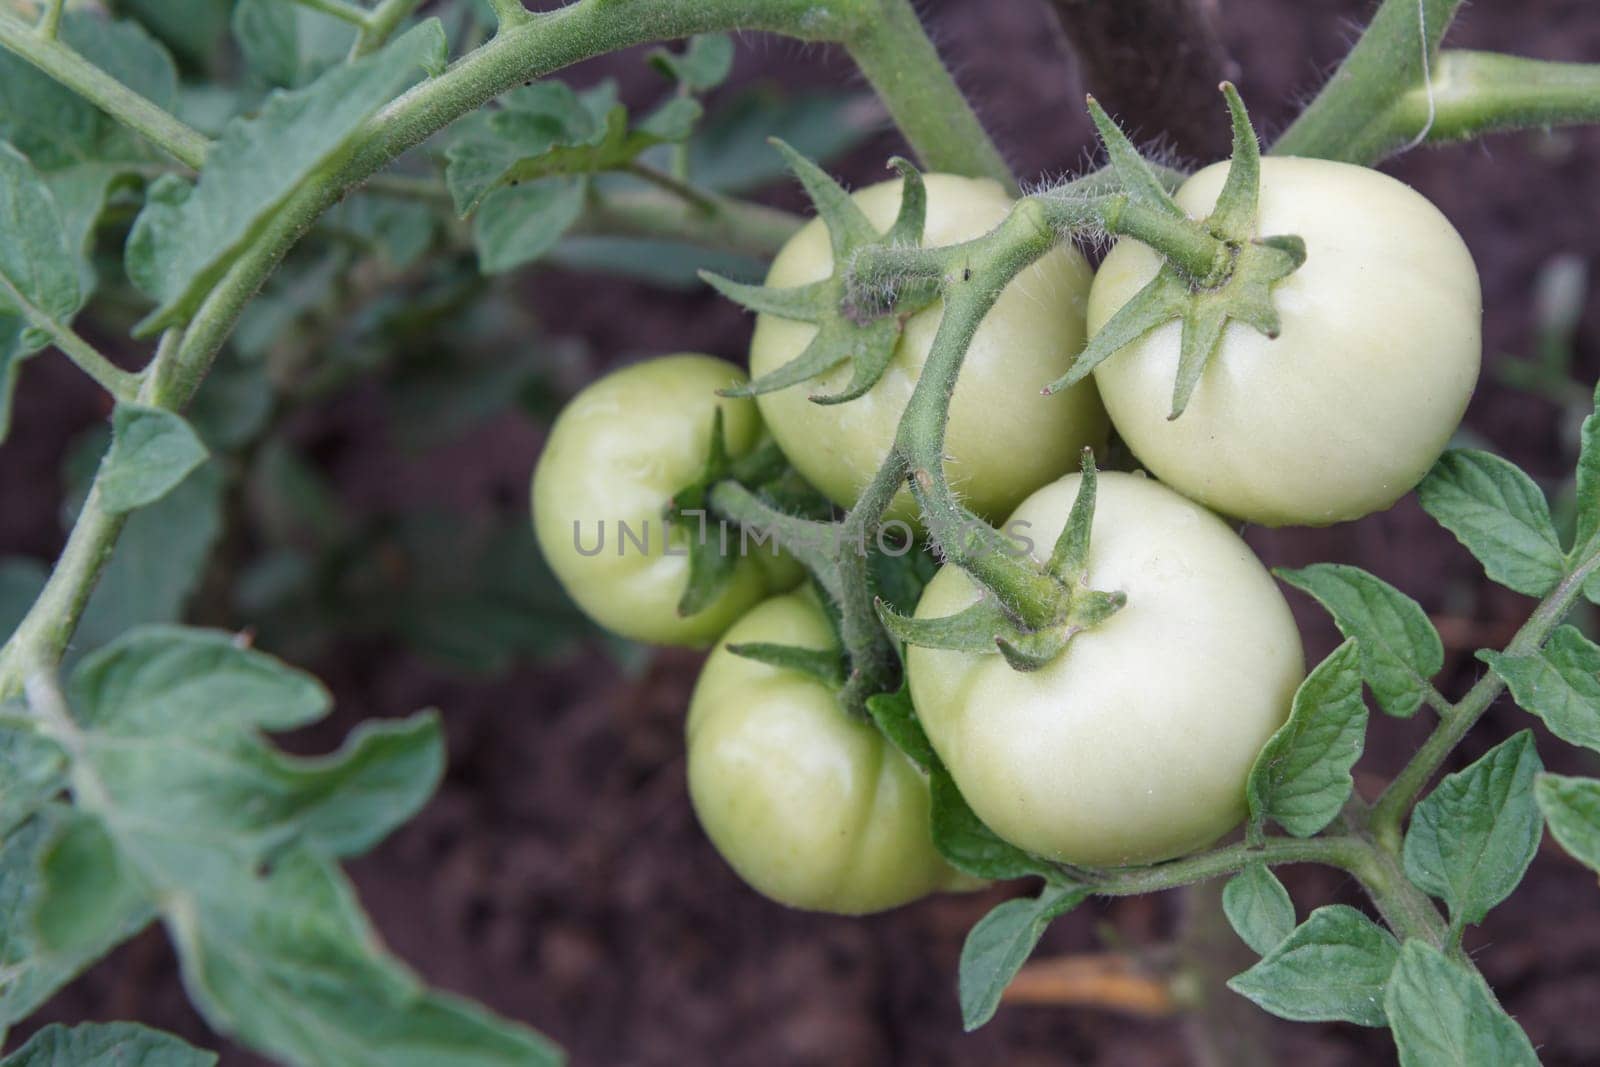 Top view of unripe green tomatoes growing on bush in the garden. Top view. Cultivation of tomatoes in a greenhouse.